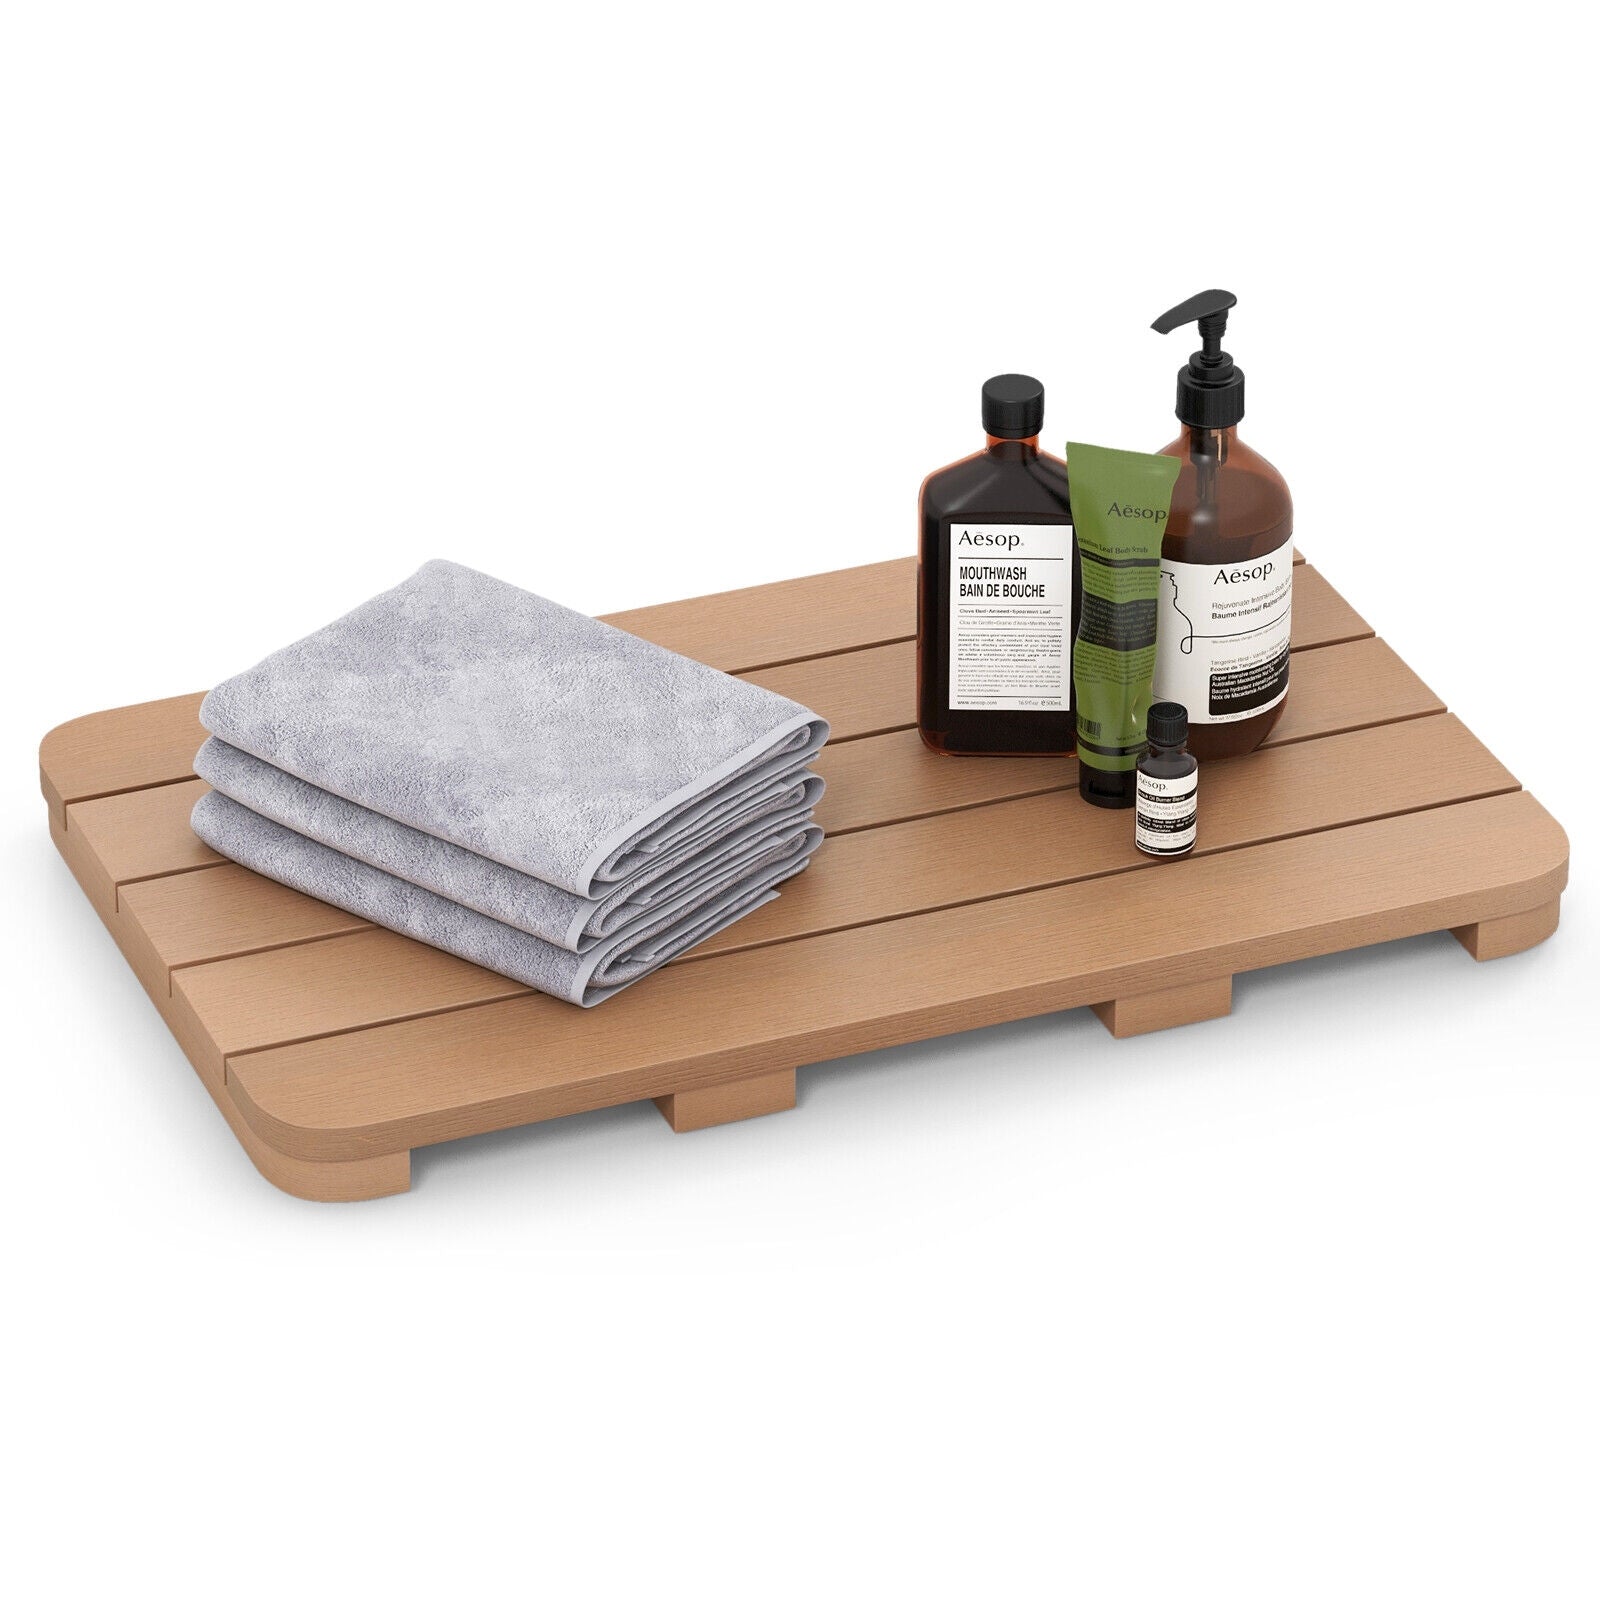 Waterproof HIPS Spa Shower Mat for Bathroom with Non Slip Foot Pads, Brown Bath Safety   at Gallery Canada